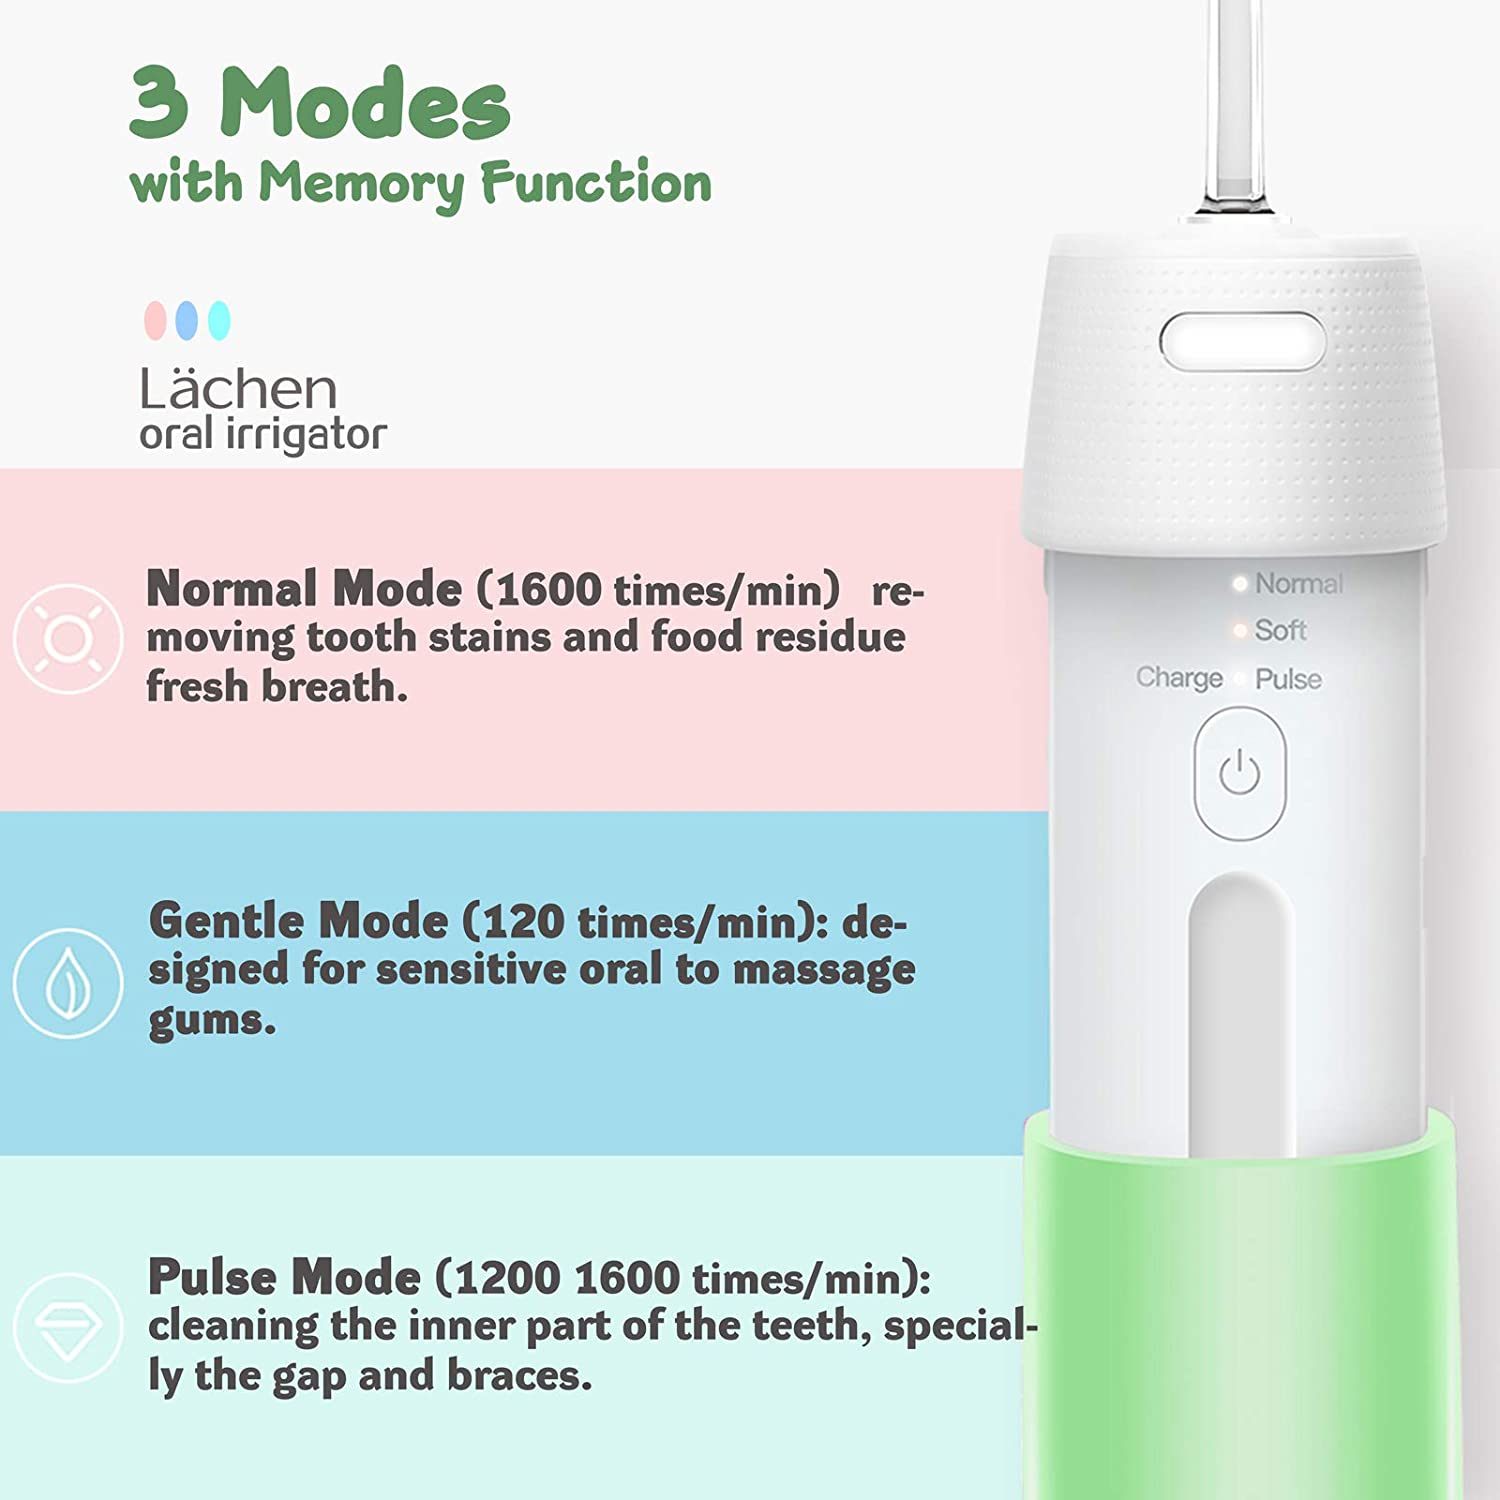 Water Flosser Portable Cordless Dental Oral Irrigator Mini Rechargeable Electric Flossing for Clean Teeth with 3 Modes IPX7 Waterproof for Home Travel Office Braces and Bridges Care Gift by Lächen